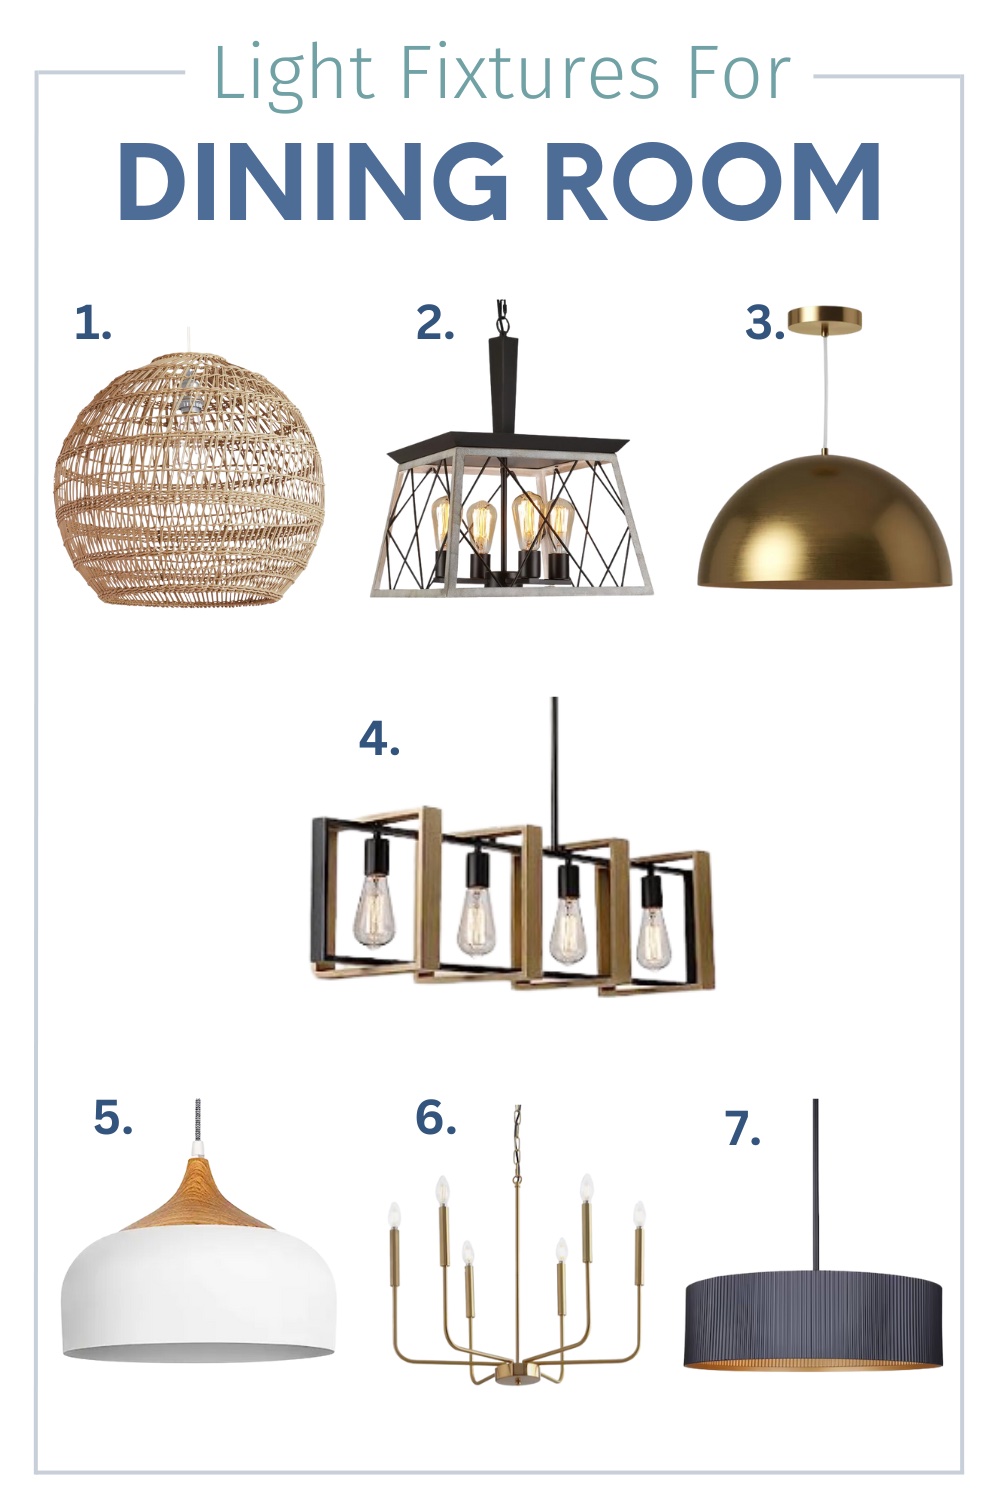 assortment of affordable dining room light fixtures